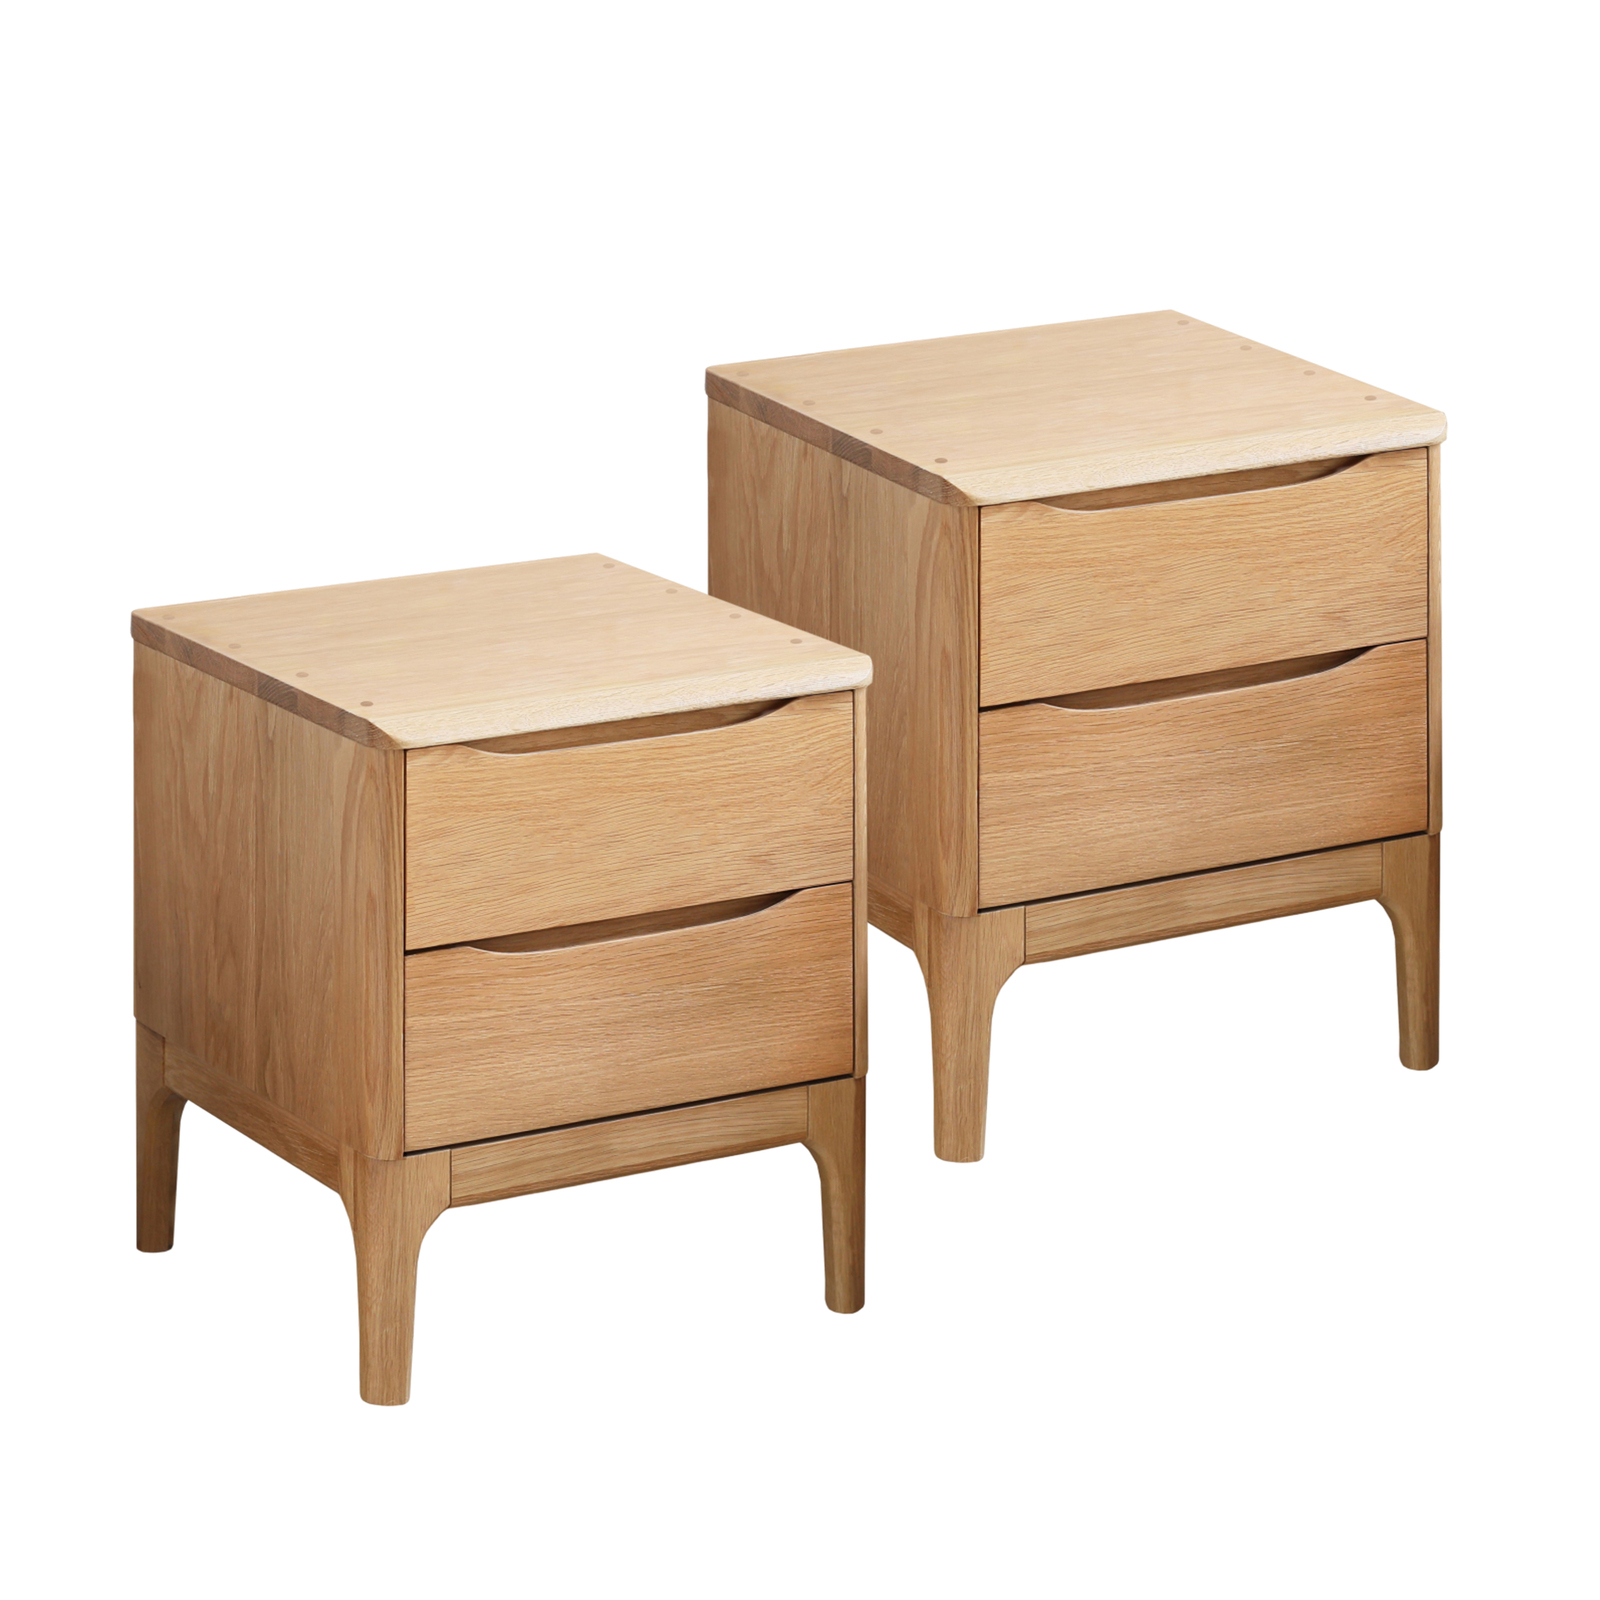 MIUZ 2x Solid American Oak Timber Bedside Tables Drawers Side Table Nightstand Storage Cabinet 